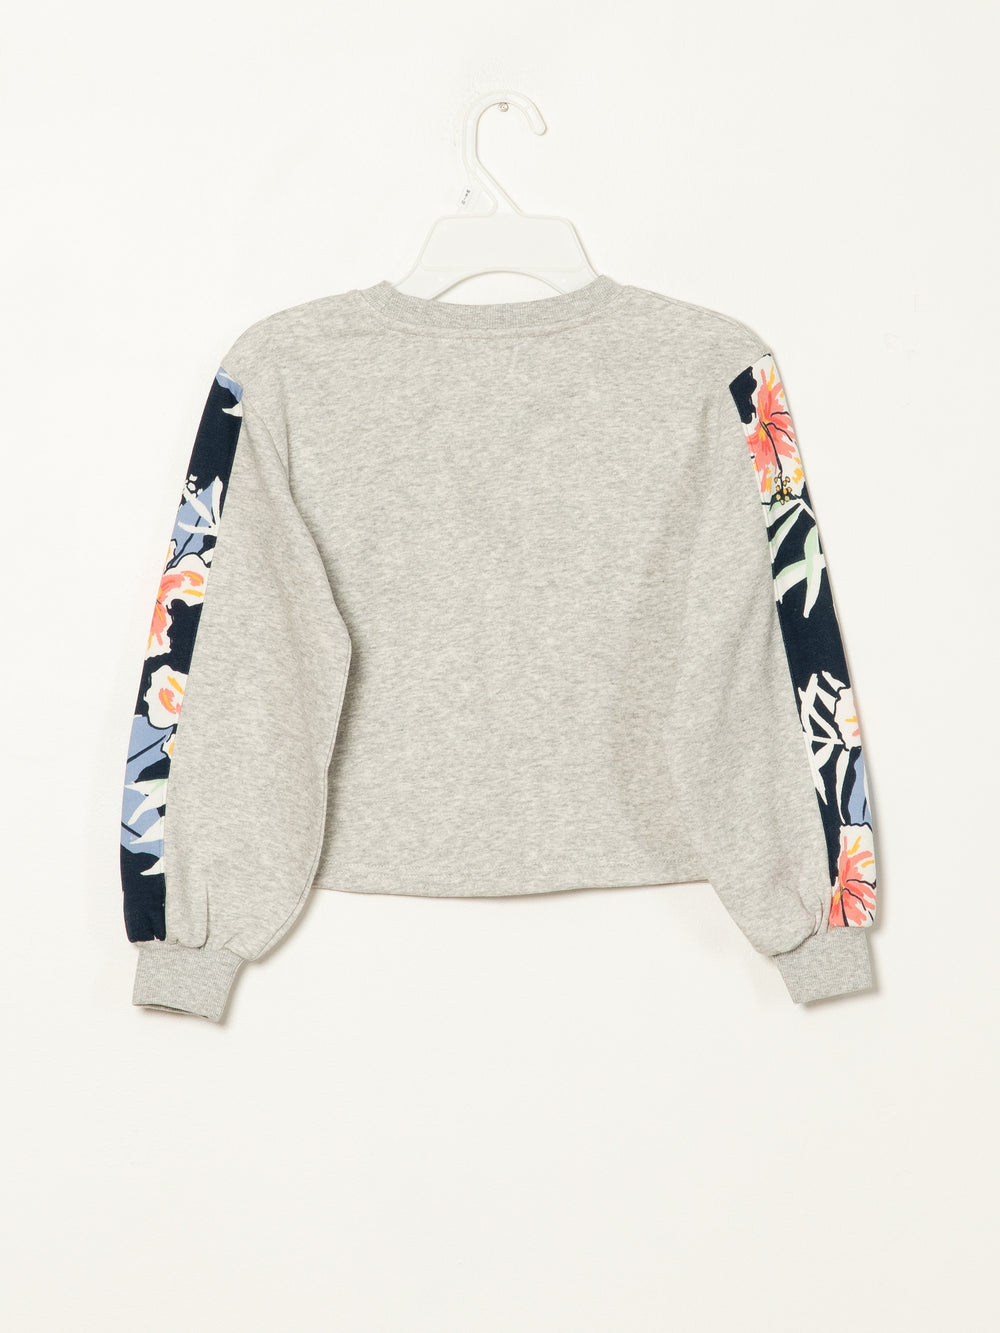 ROXY YOUTH GIRLS TELL YOUR FRIENDS CREWNECK - CLEARANCE